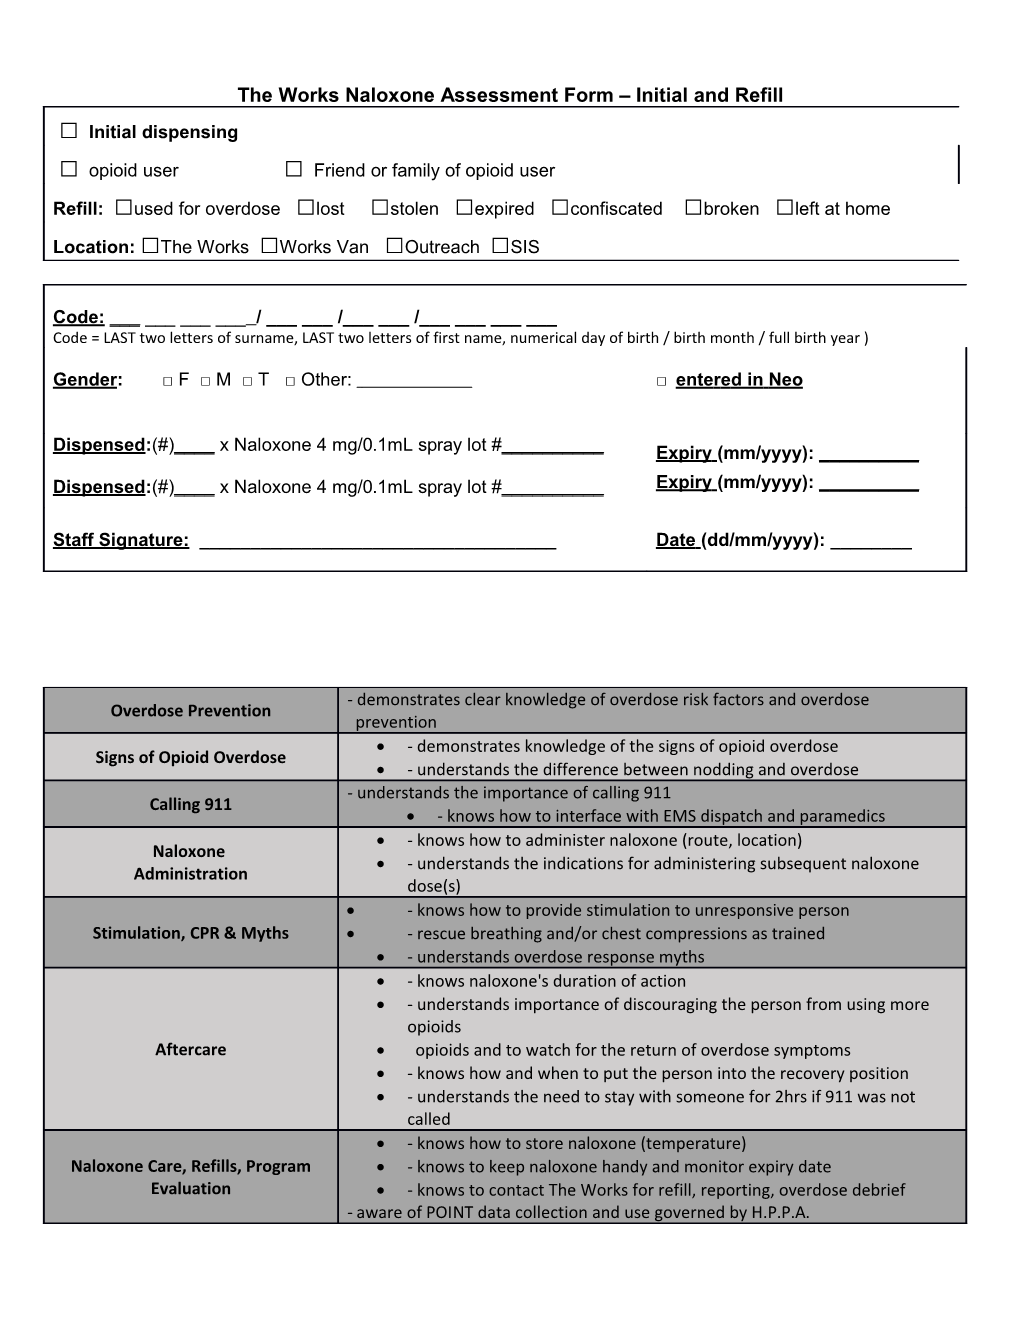 The Works Naloxone Assessment Form Initial and Refill